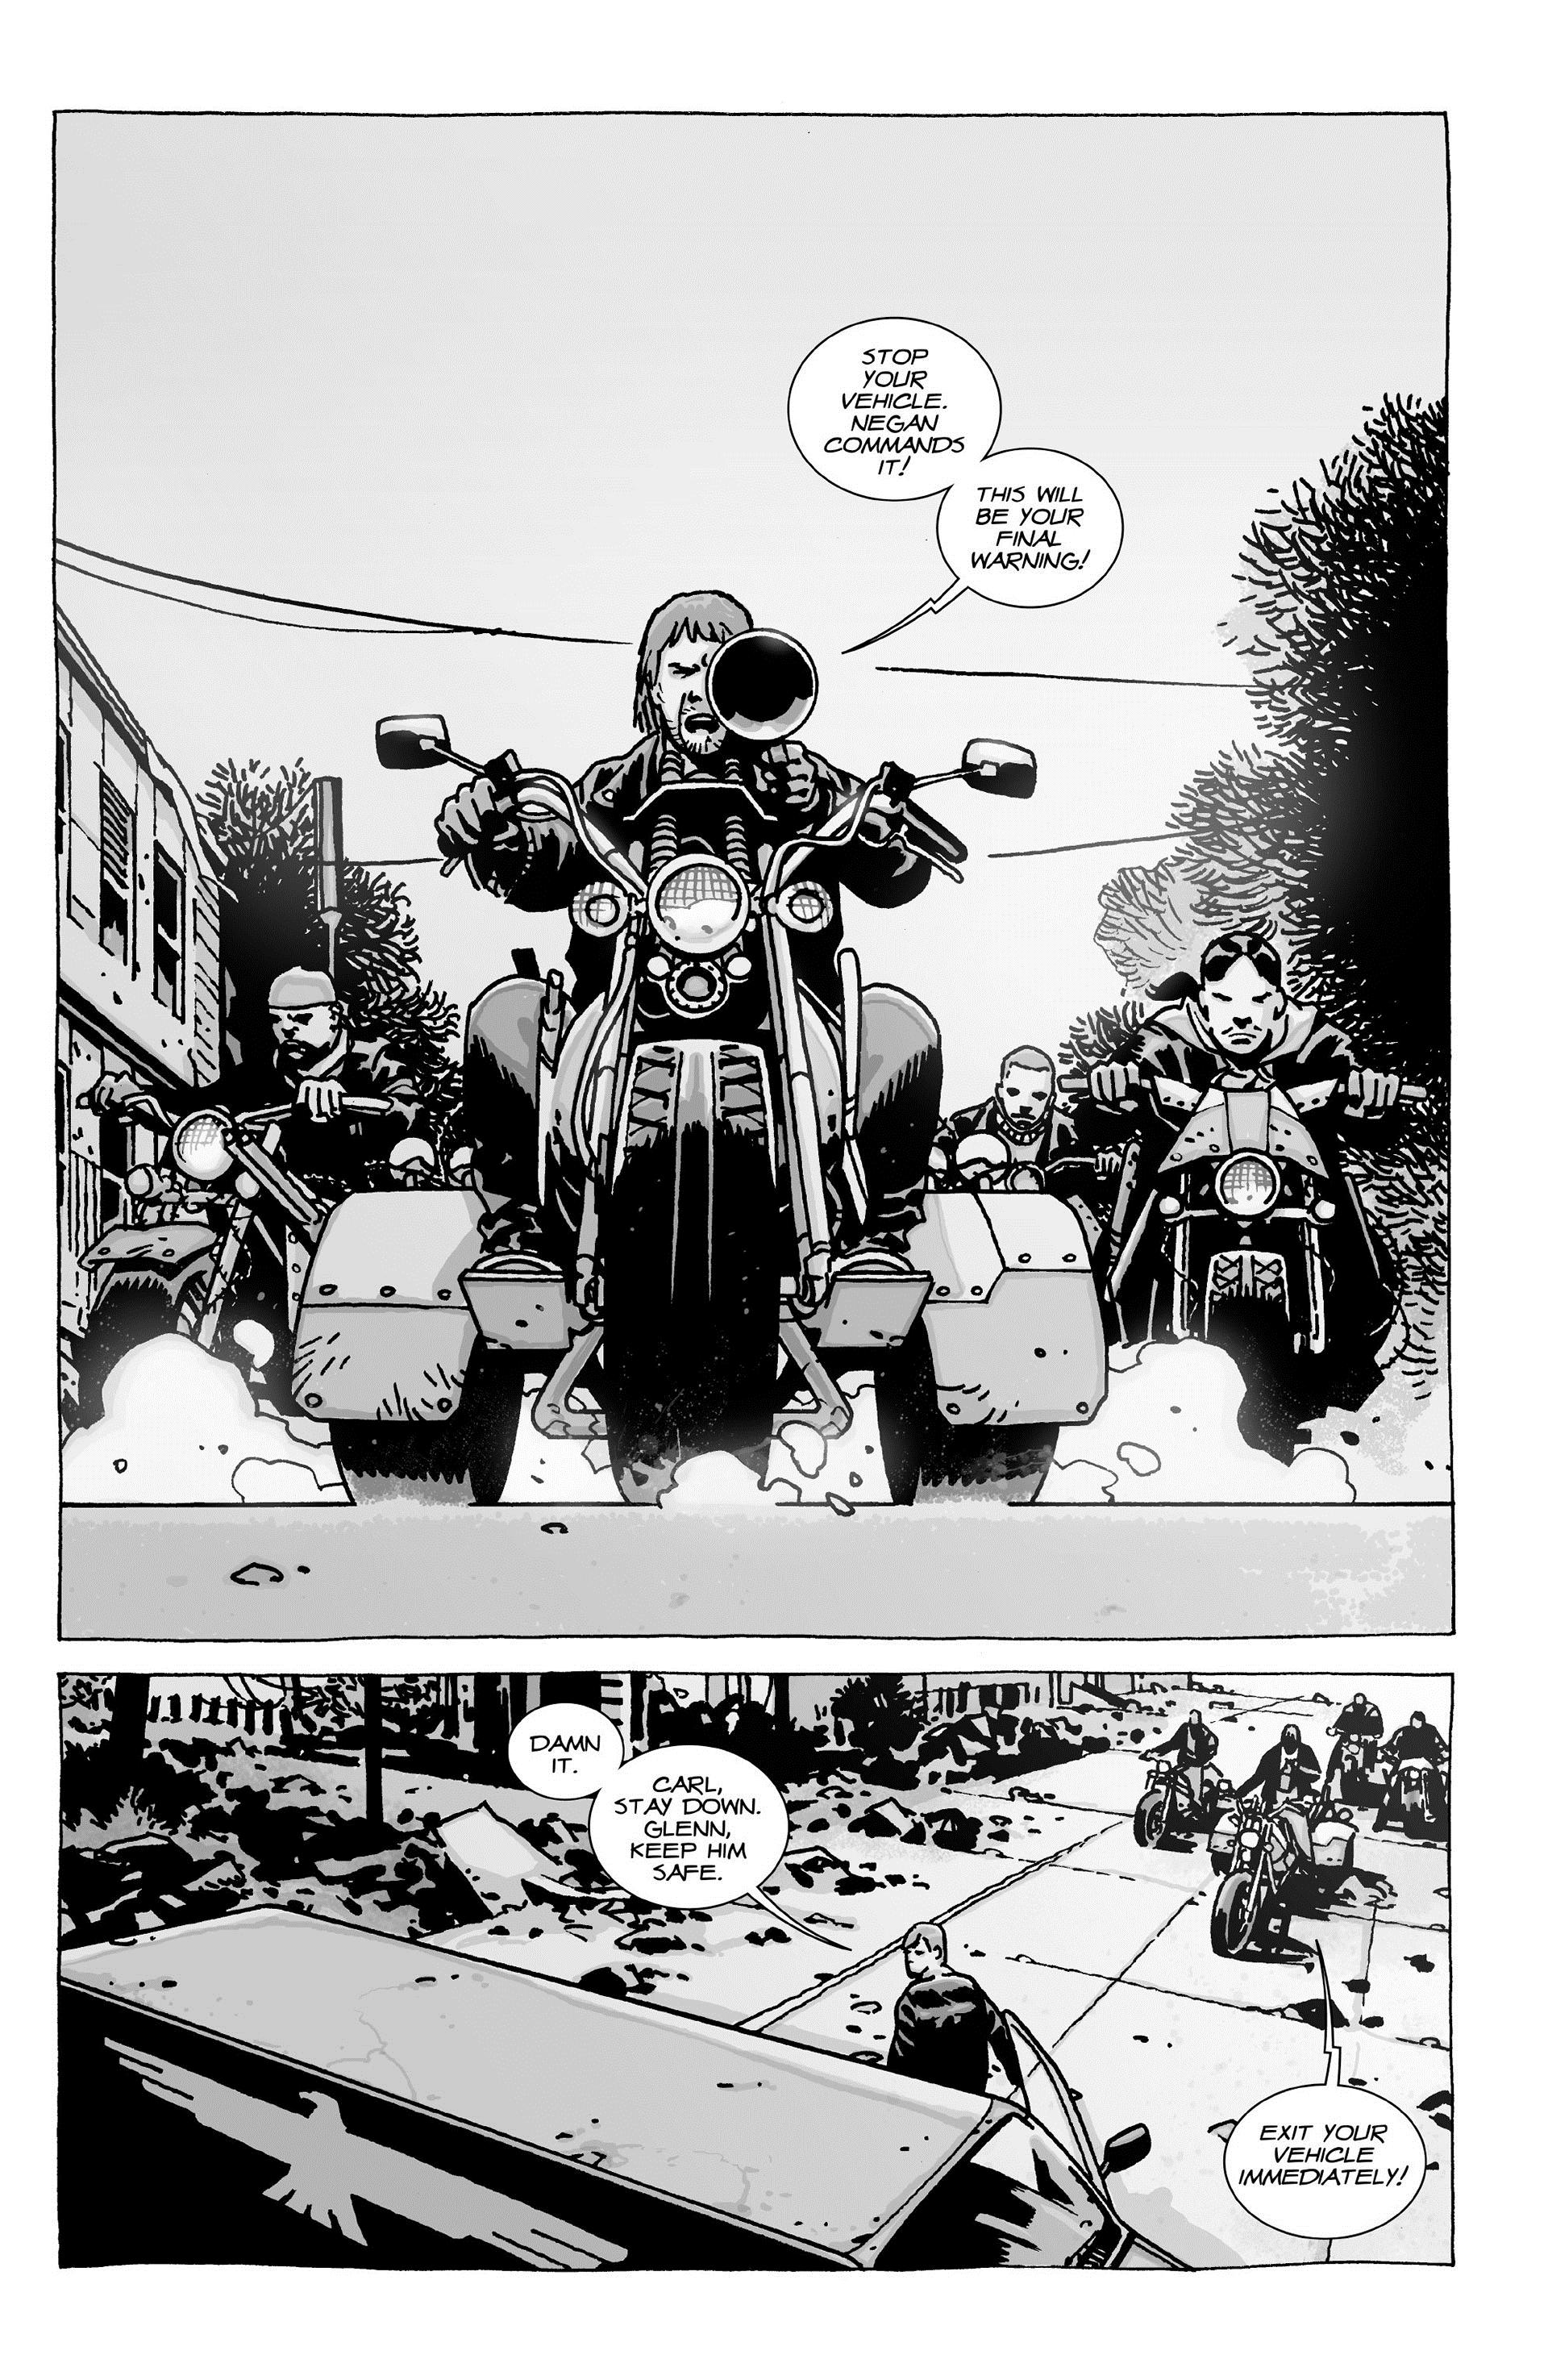 The Walking Dead Book Nine review